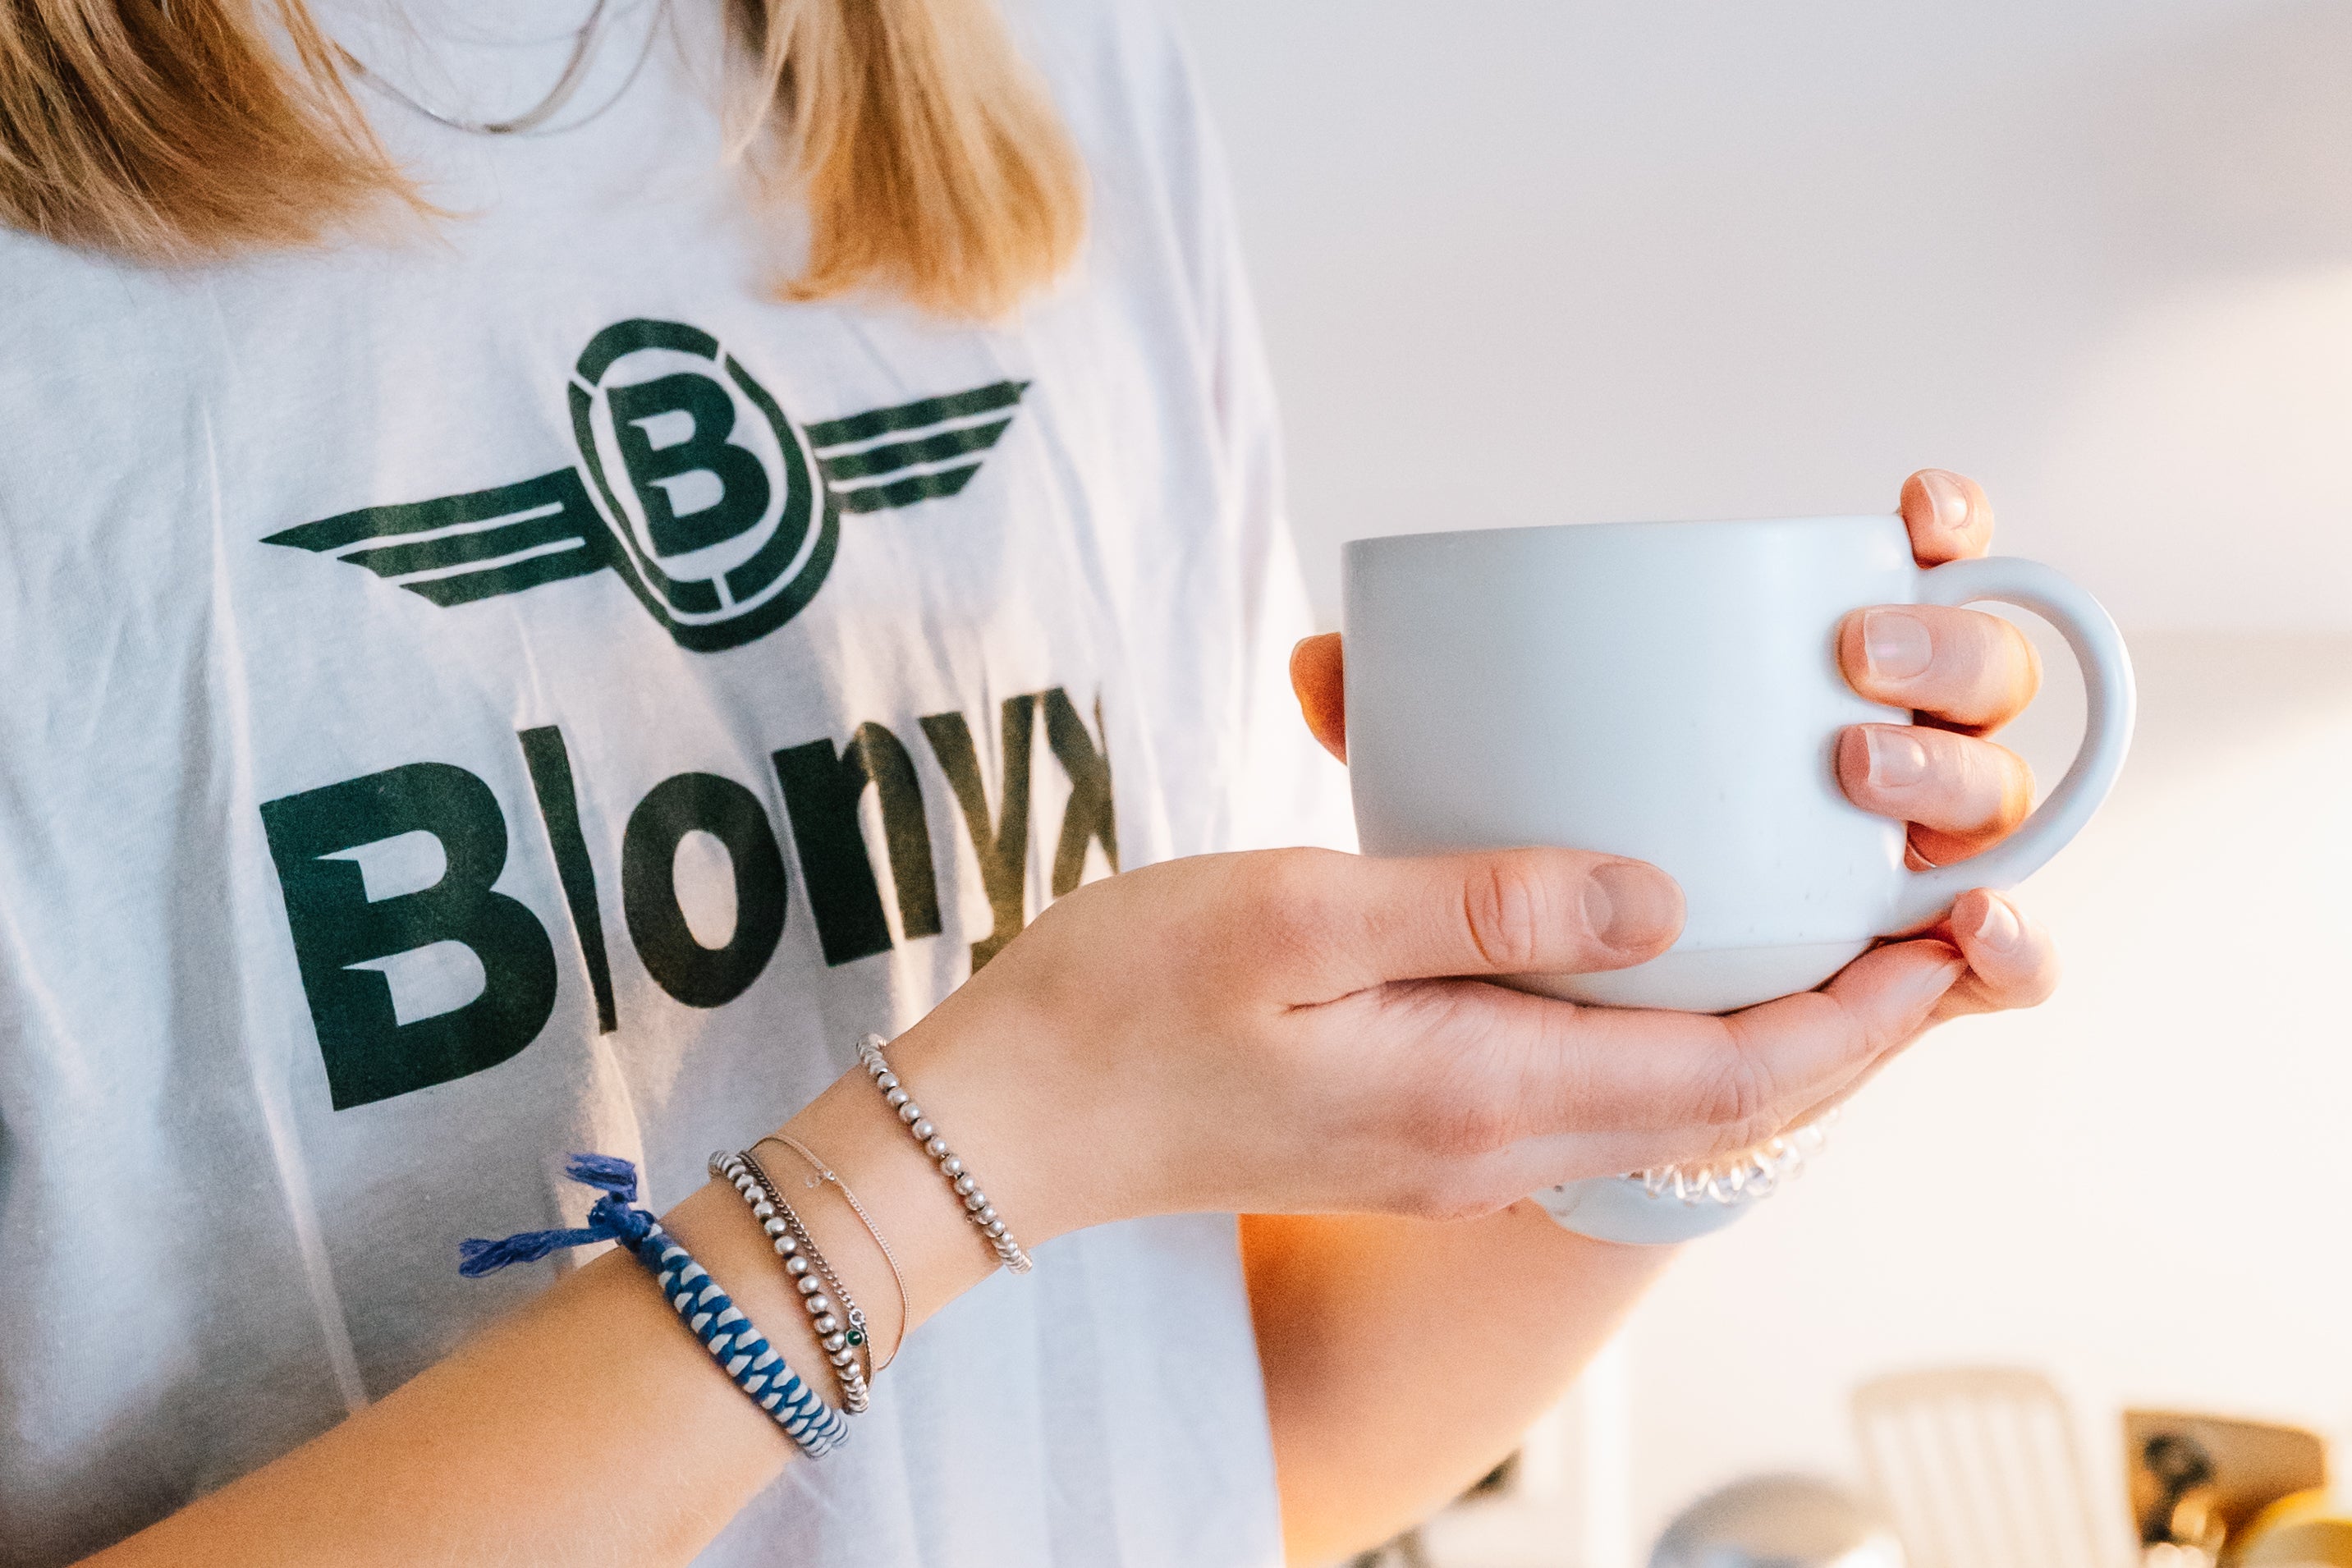 Woman holding a mug of coffee in a Blonyx shirt